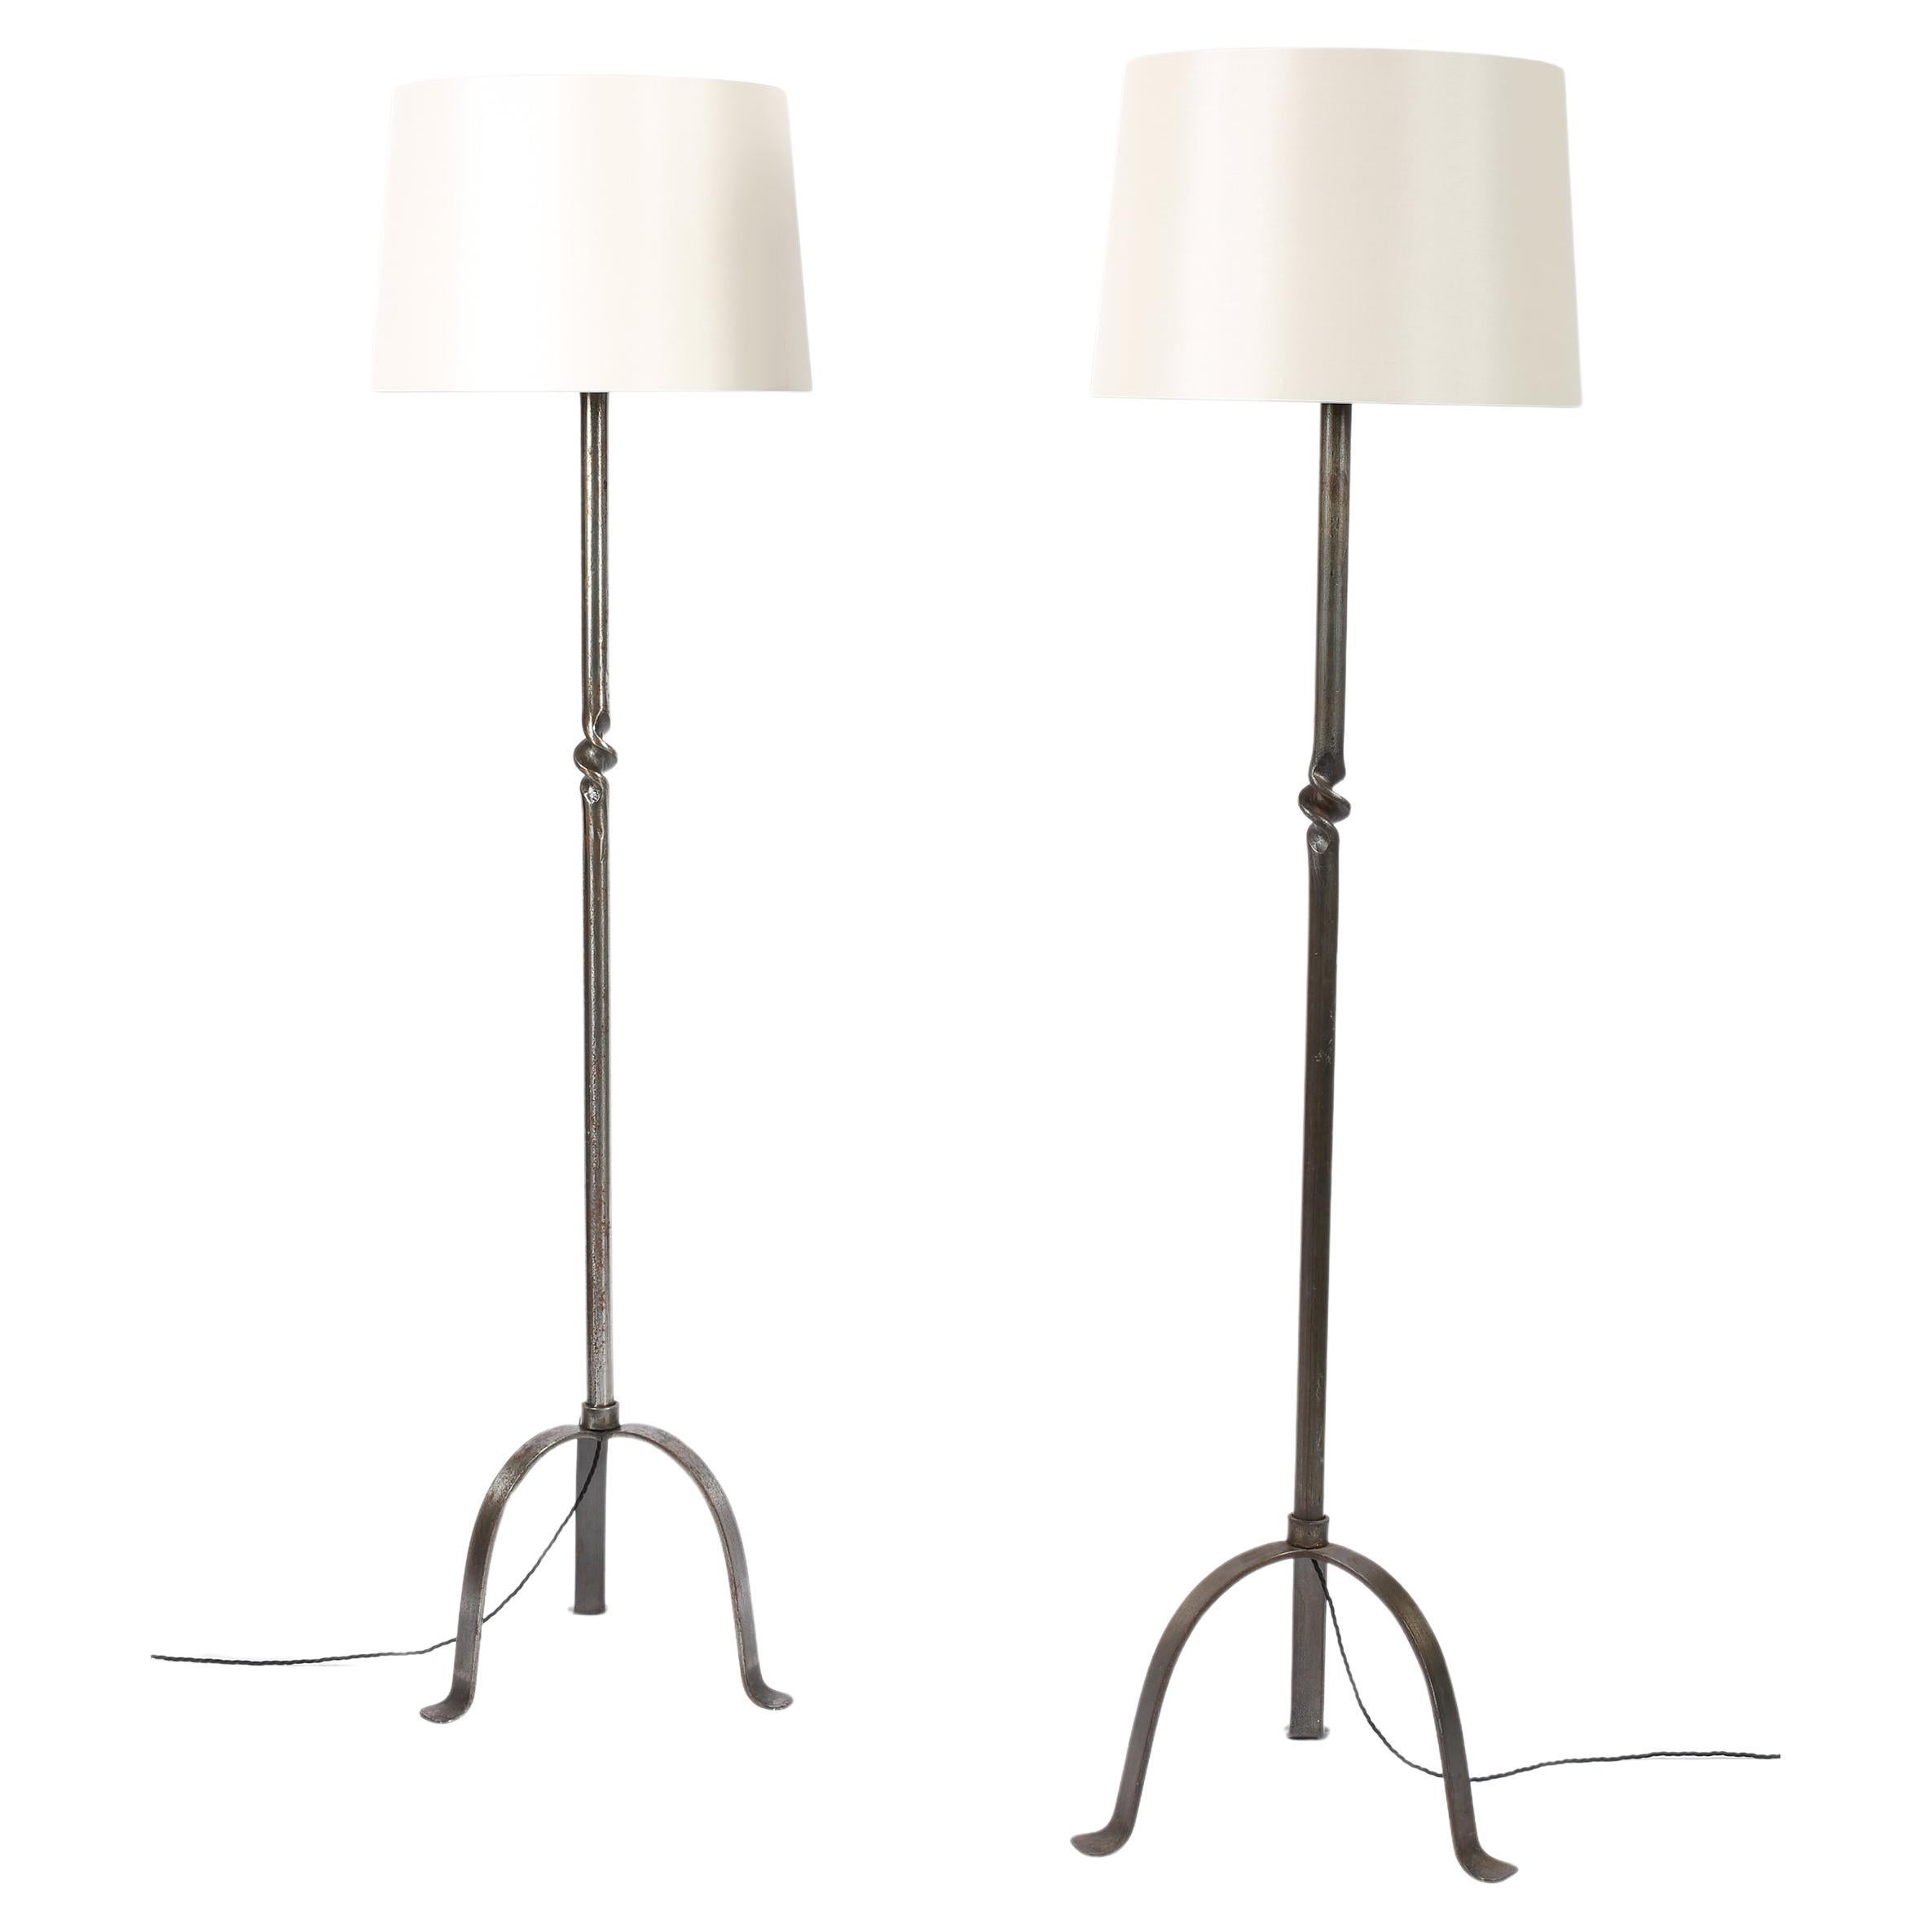 Pair of French Midcentury Forged Iron Torsade Floor Lamps For Sale